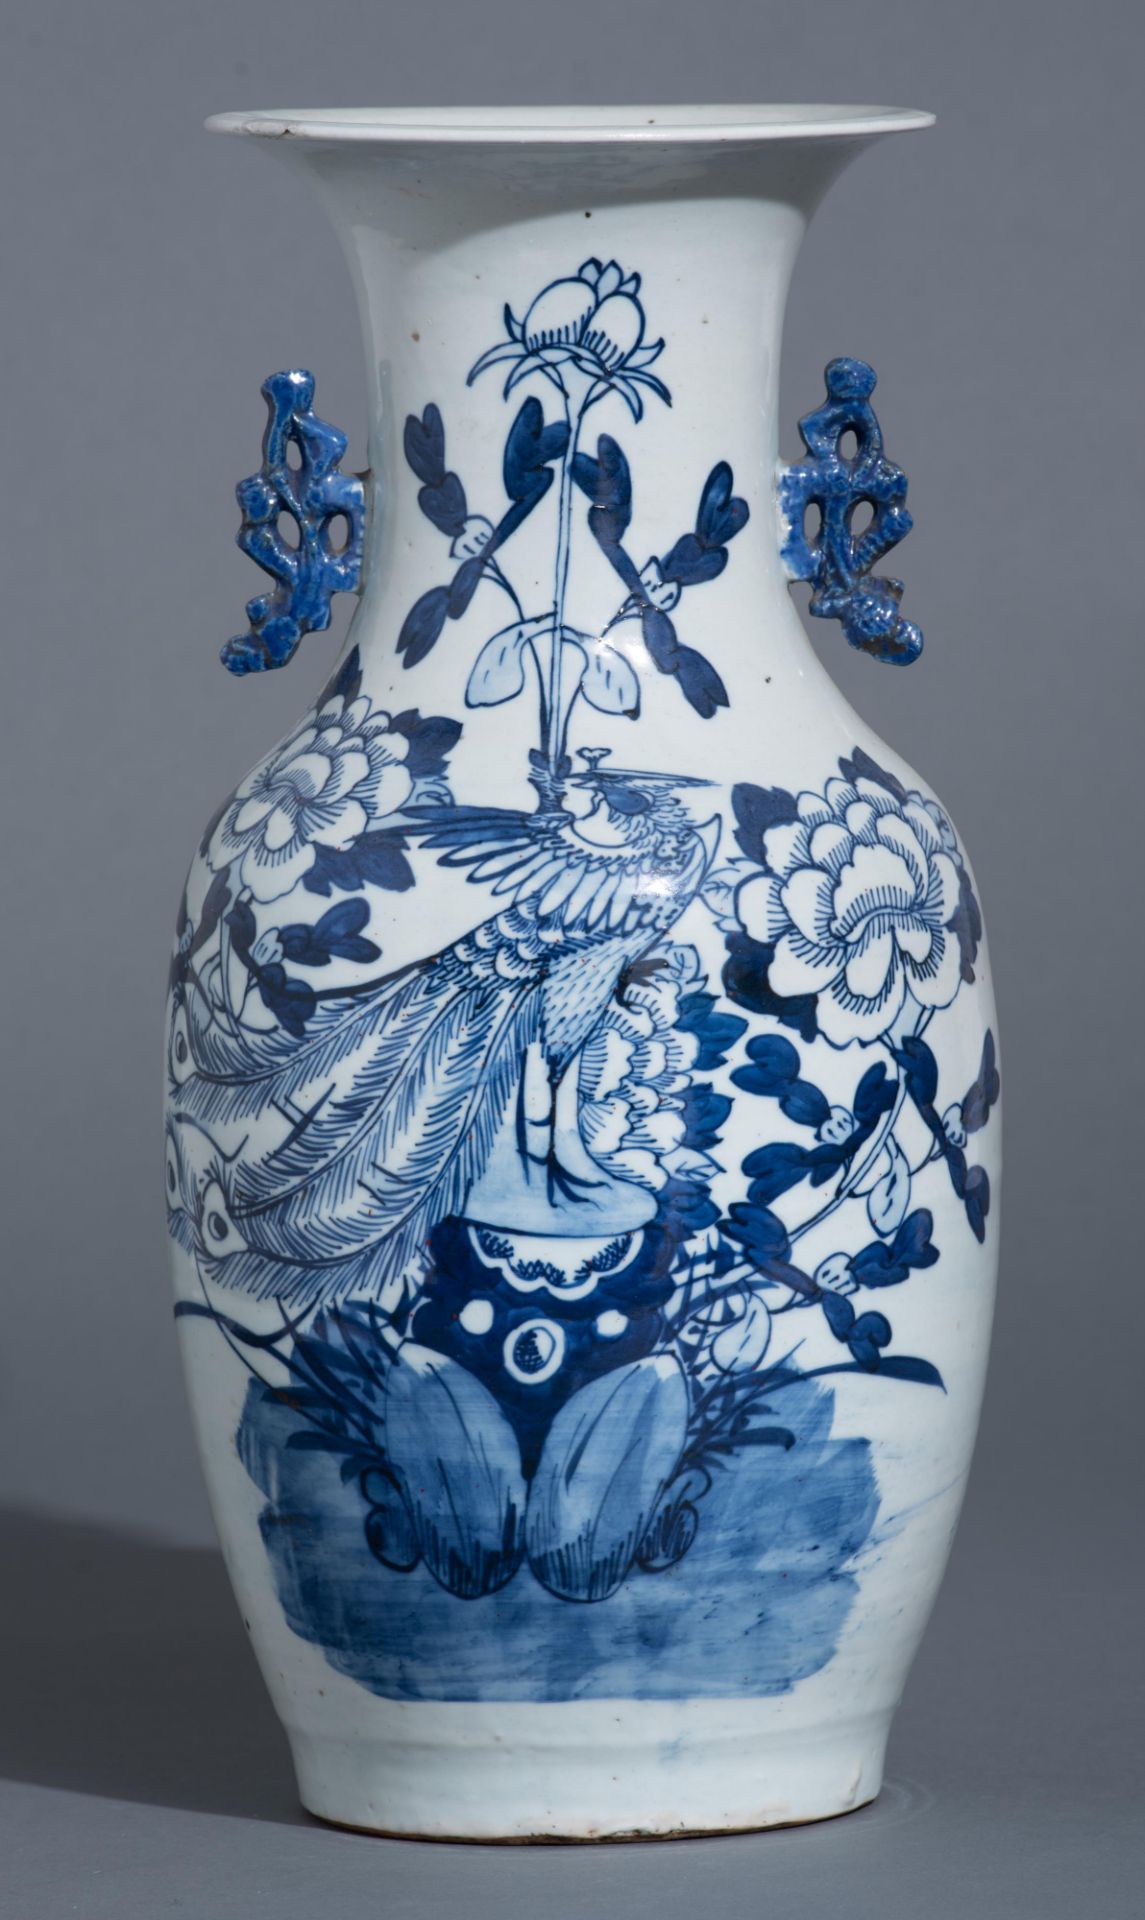 Four Chinese blue and white on celadon ground vases, late 19thC, H 42 - 43 cm - Image 46 of 52